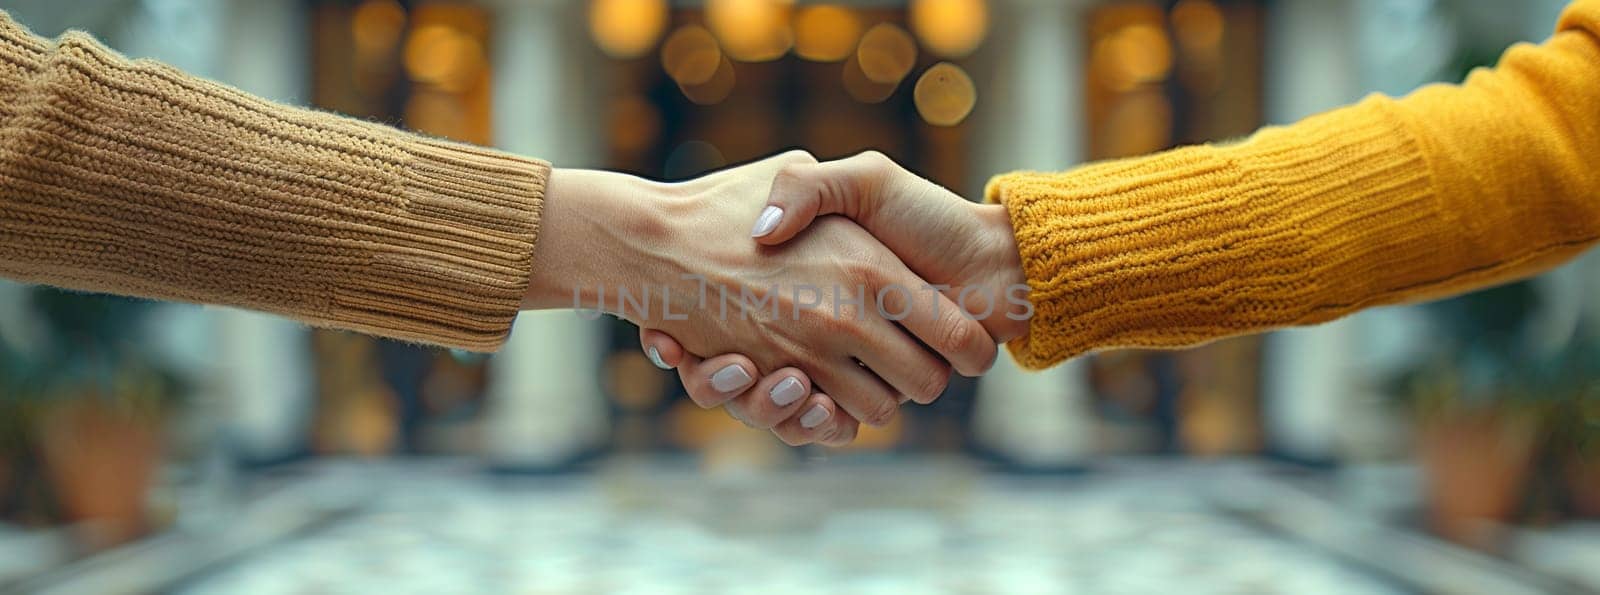 Two individuals exchanging a handshake in front of a wooden building by richwolf